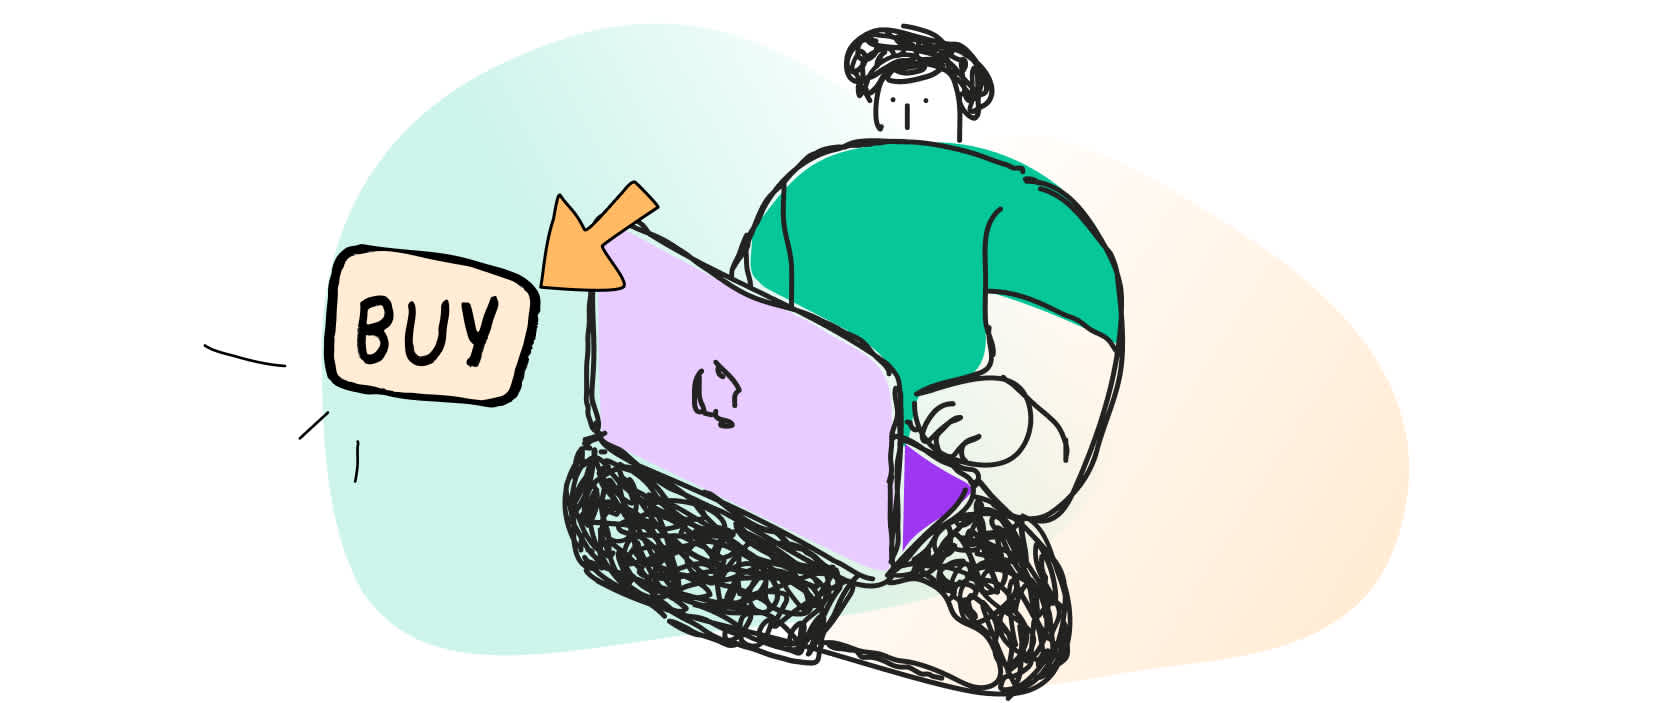 illustration of a person in green shirt sitting at a purple laptop with a buy speech bubble- concept image for predicting customer behavior